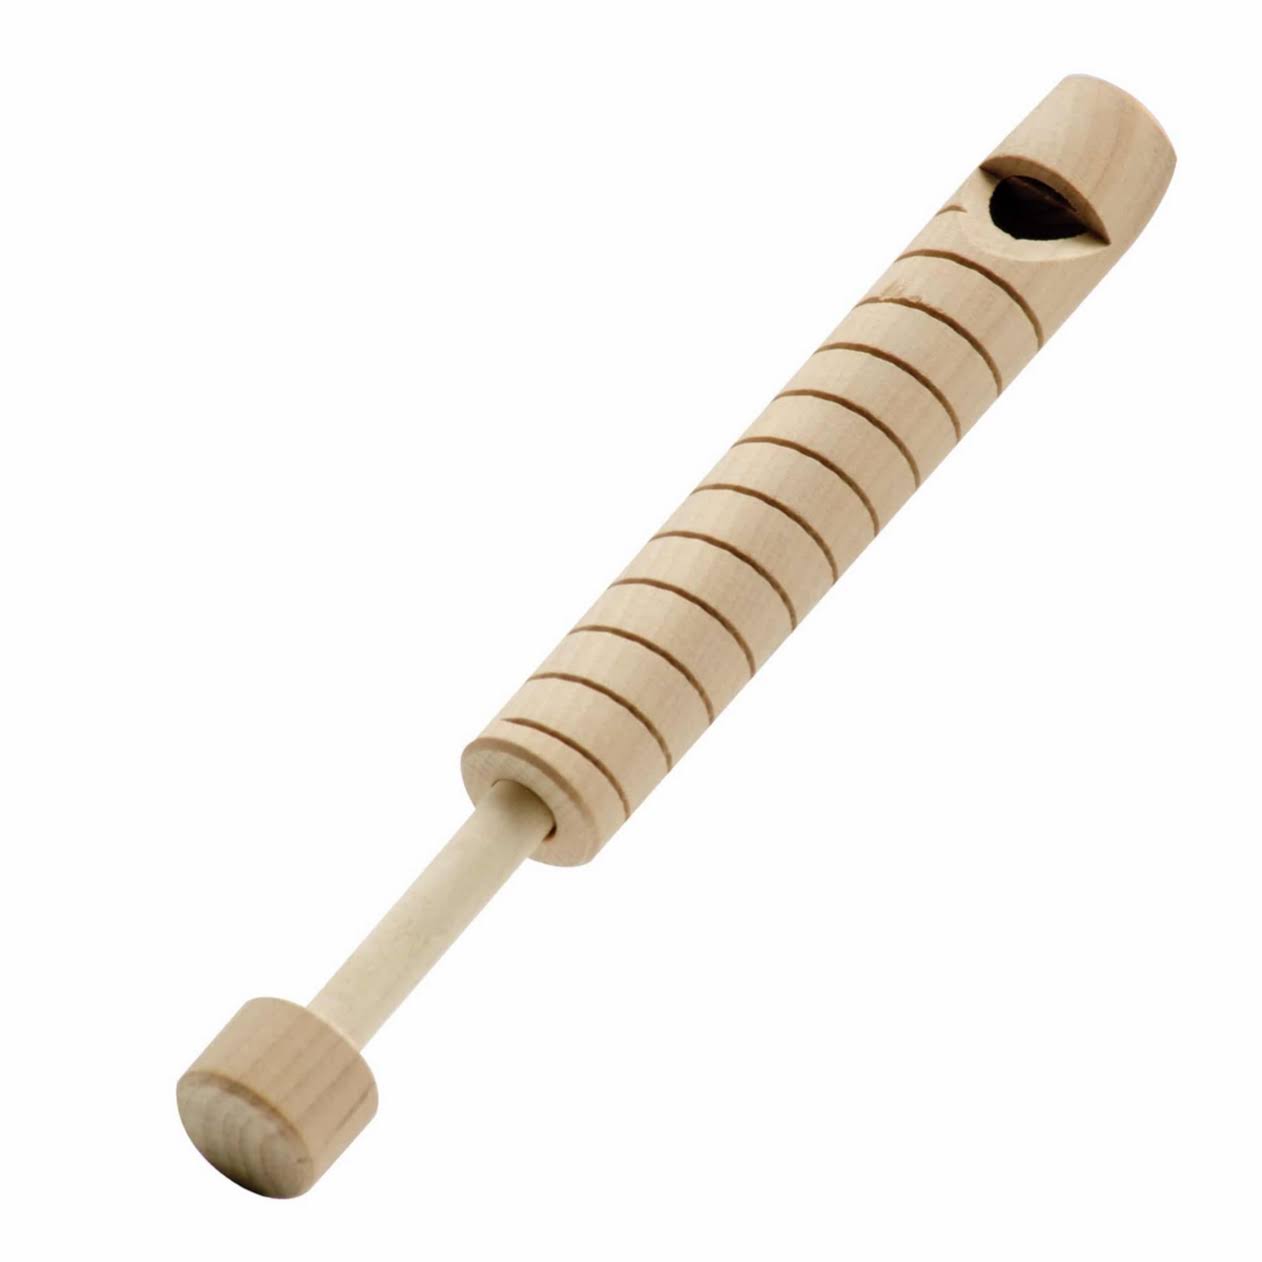 Schylling Wood Slide Whistle Toy